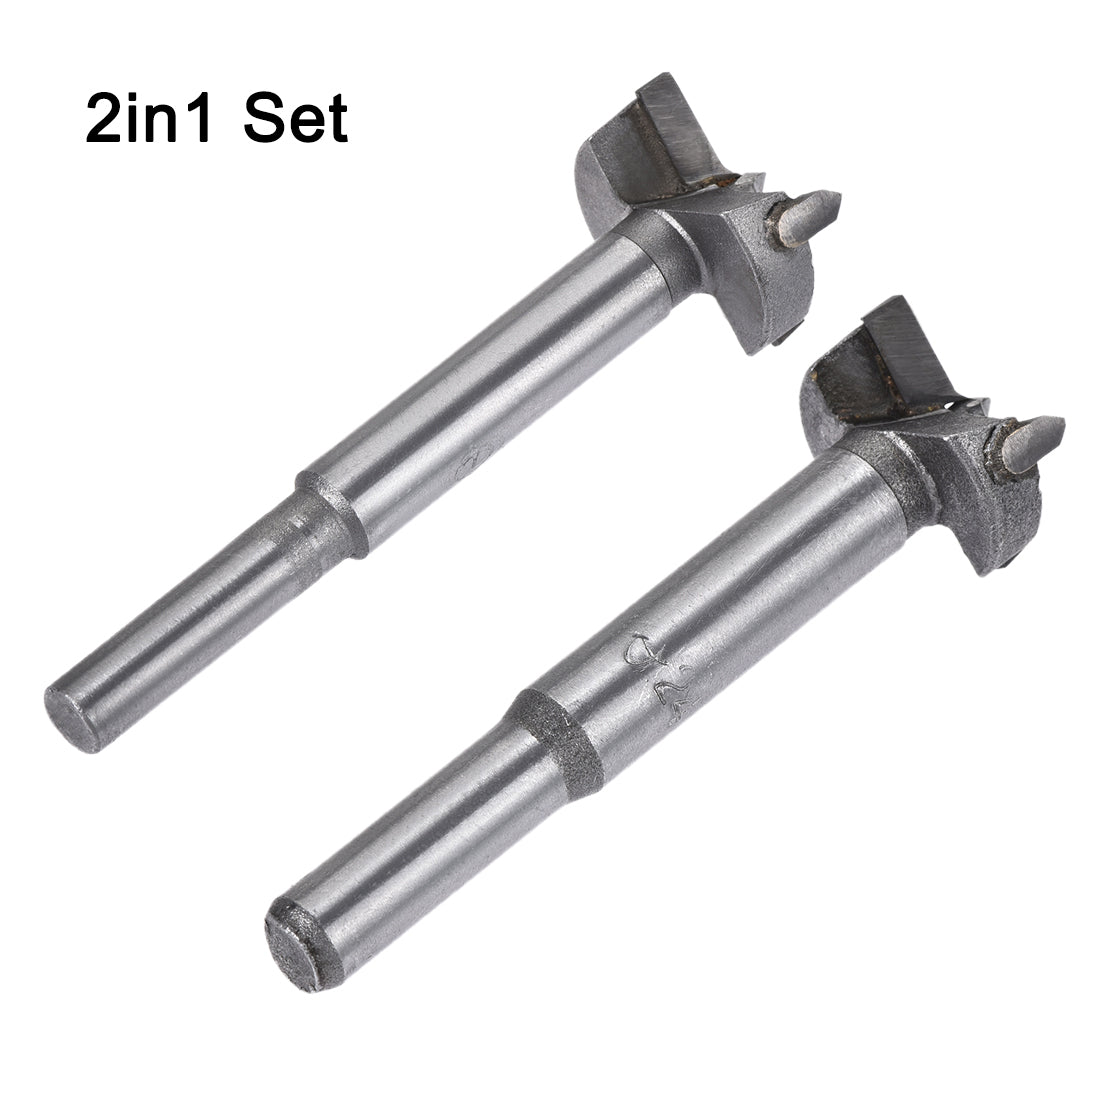 Uxcell Uxcell Forstner Wood Boring Drill Bits 21mm 22mm Dia. Hole Saw Carbide Alloy Steel Tip Round Shank Cutting for Hinge Plywood Wood Tool 2in1 Set